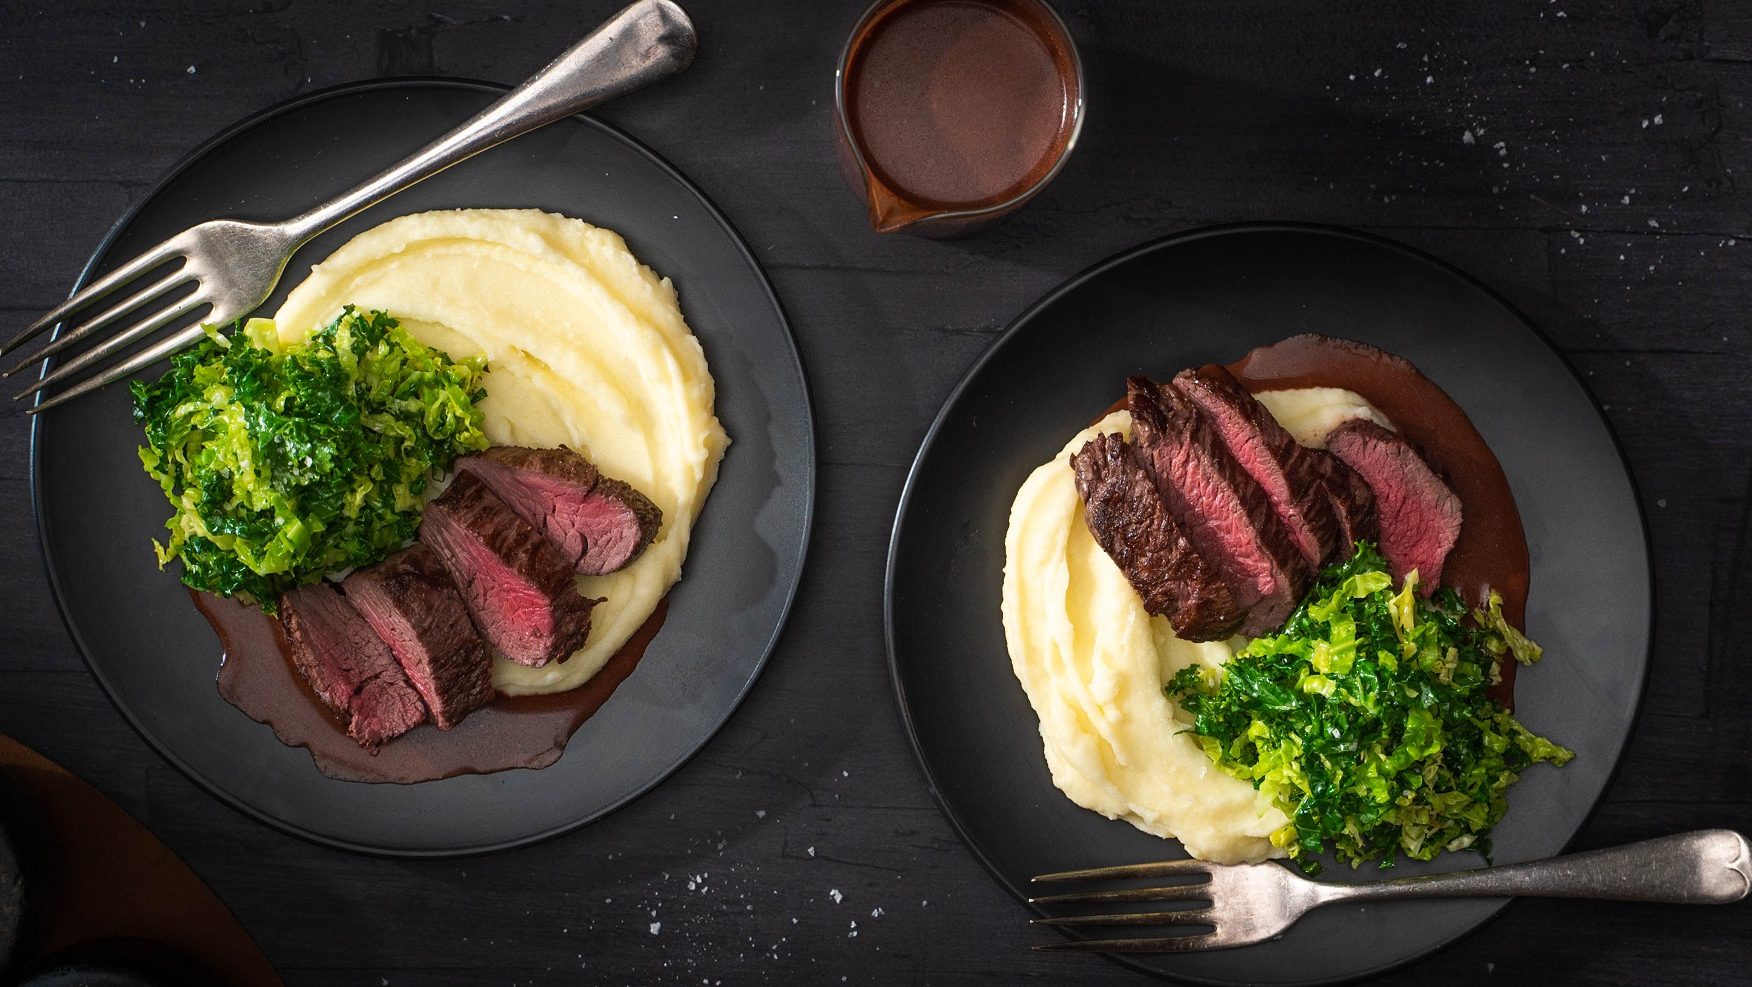 Two black plates of steak slices on white mash and greens on black table with a pot of chocolate sauce.